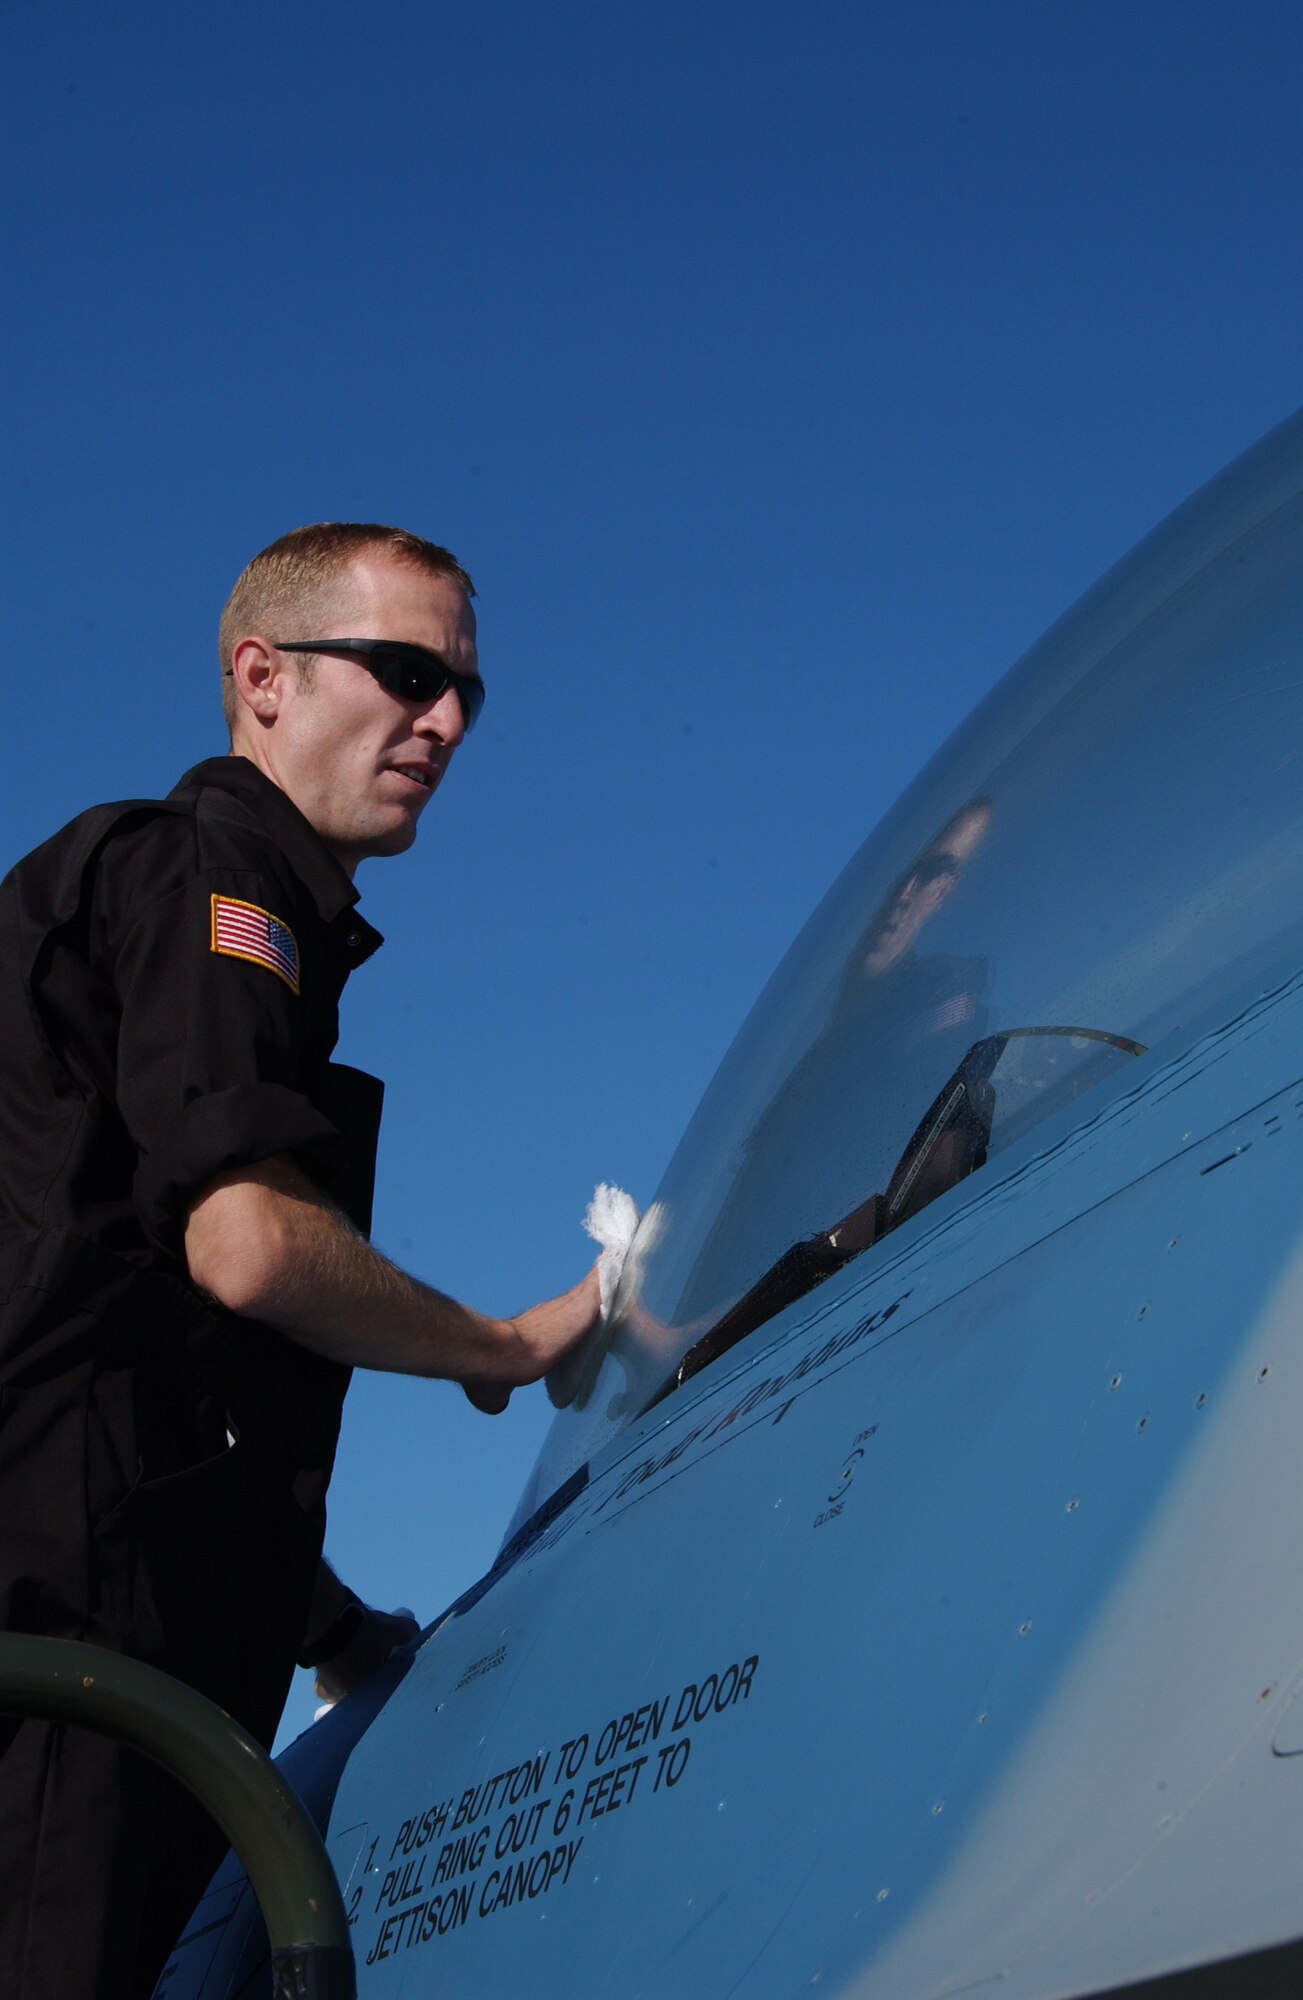 EIELSON AIR FORCE BASE, Alaska --  Senior Airman Jed Winkelman, 64th Aggressor Squadron, Nellis Air Force Base, Nev., cleans the canopy of an F-16 June 8. Airman Winkelman is one of many crew chiefs from around the Air Force who came to participate in Red Flag 07-02, which runs through June 15.  (U.S. Air Force photo by Airman 1st Class Christopher Griffin)